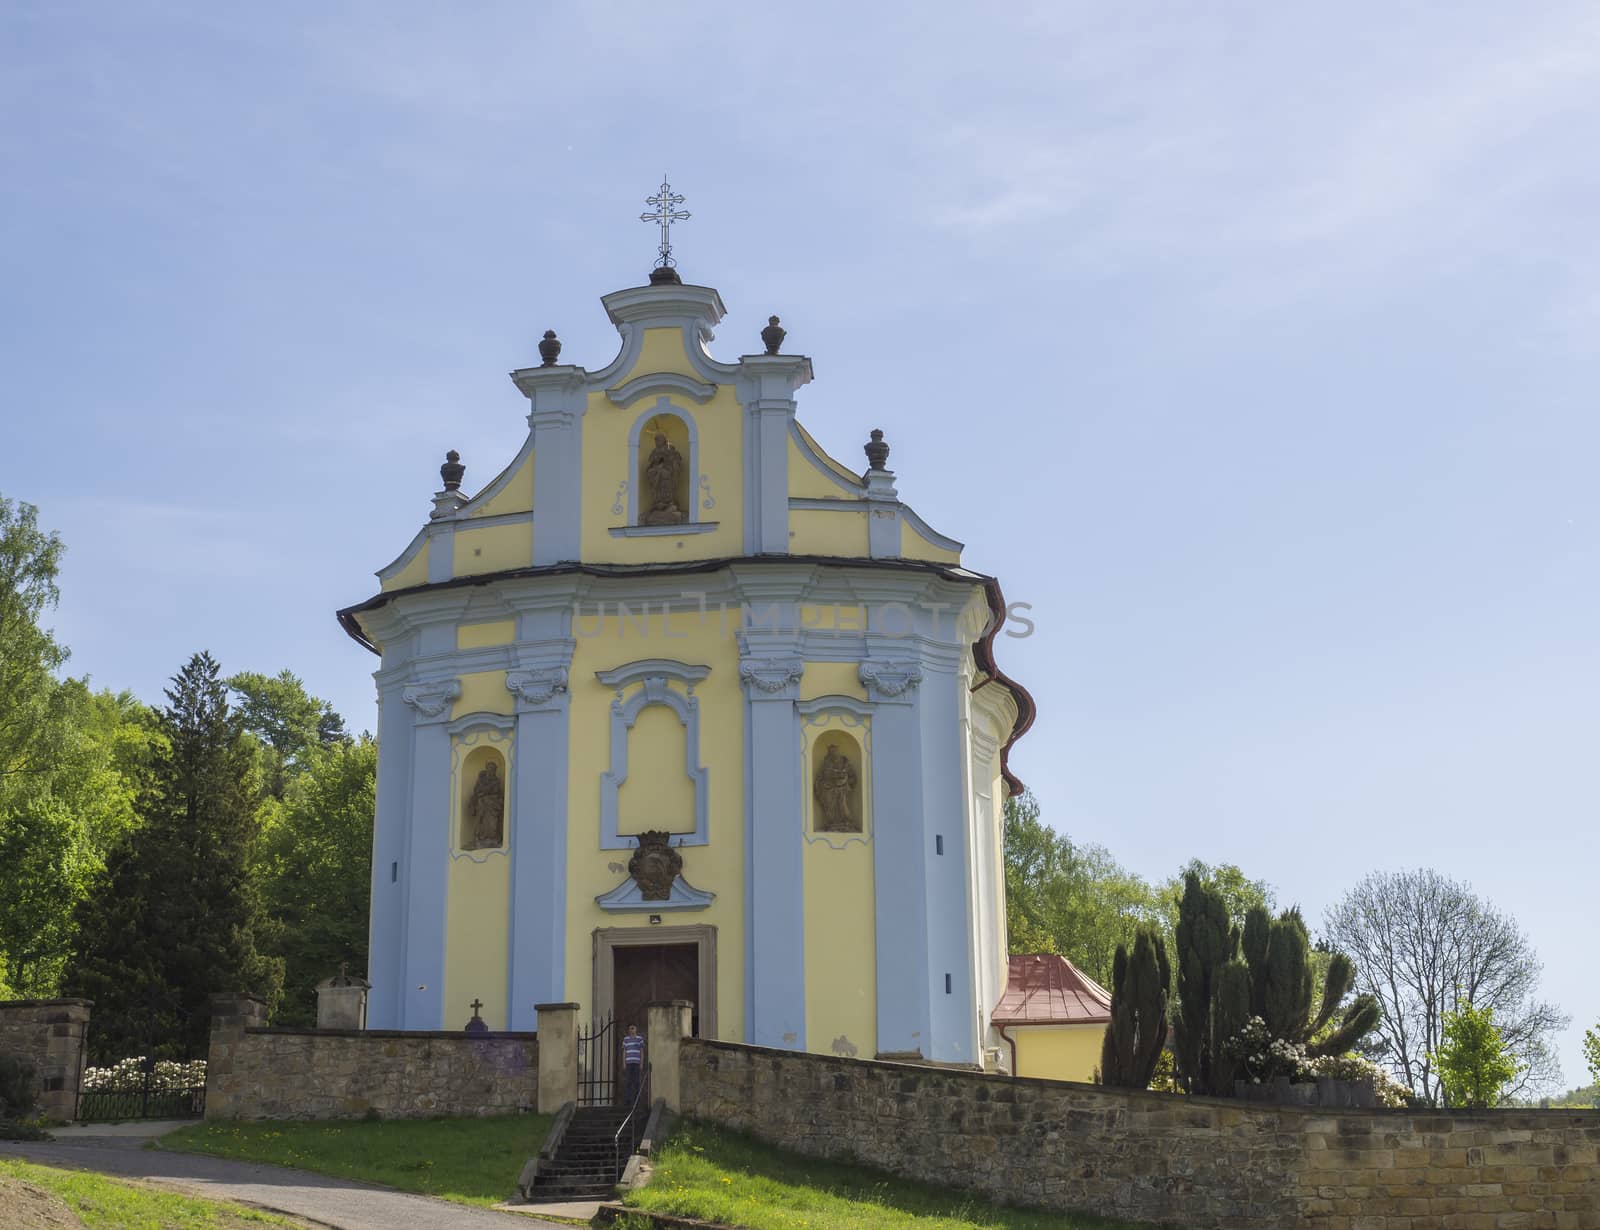 blue and yellow church in baroque style in horni prysk in czech republic with surrounding cemetery wall, boy standing at the door, blue sky background